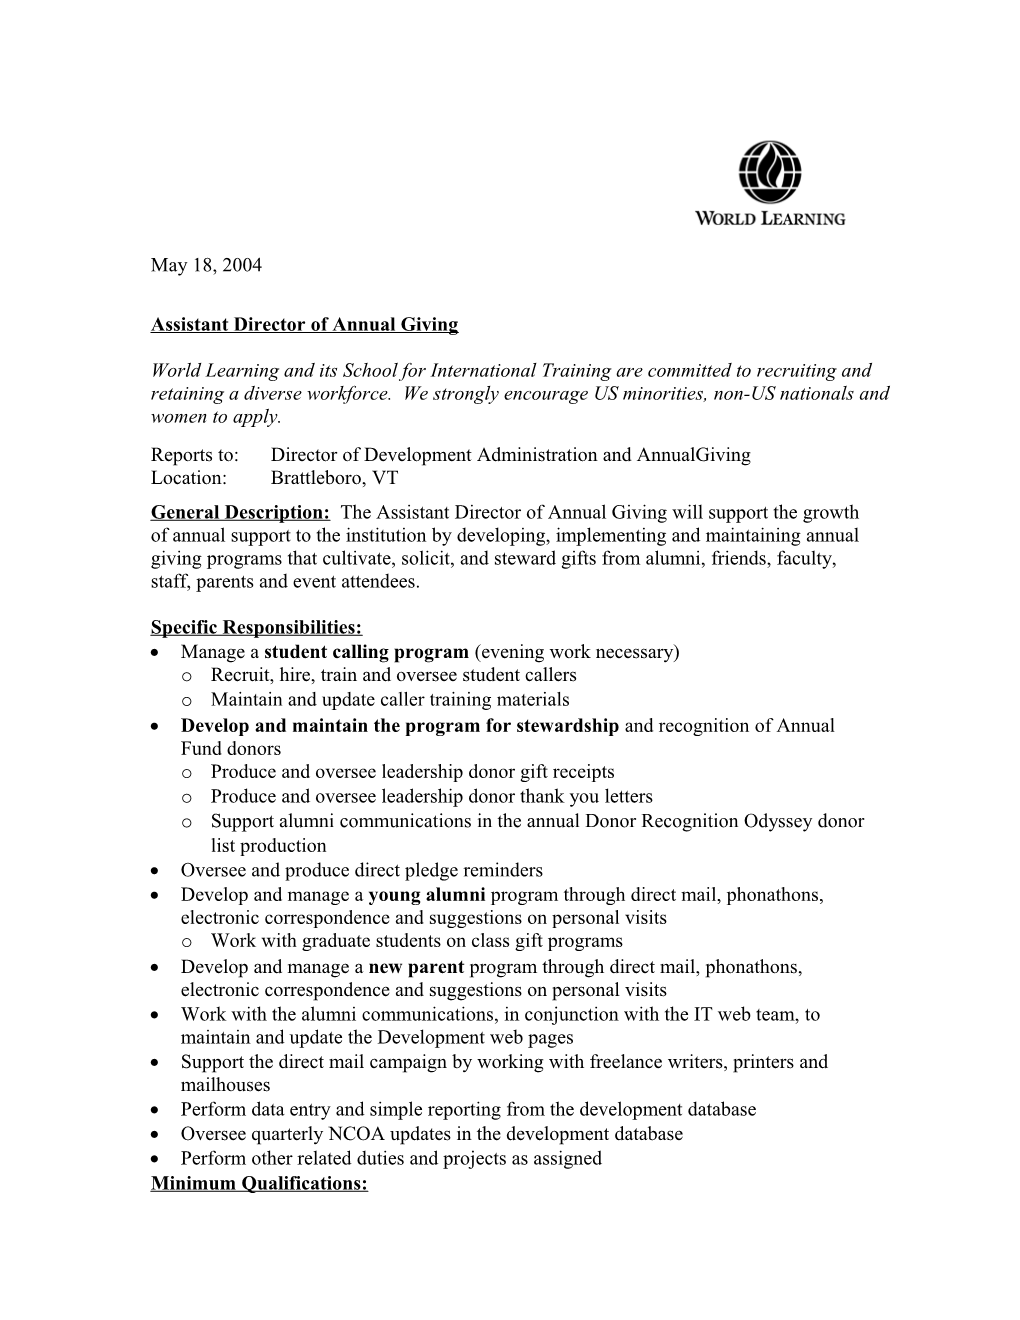 Assistant Director of Annual Giving